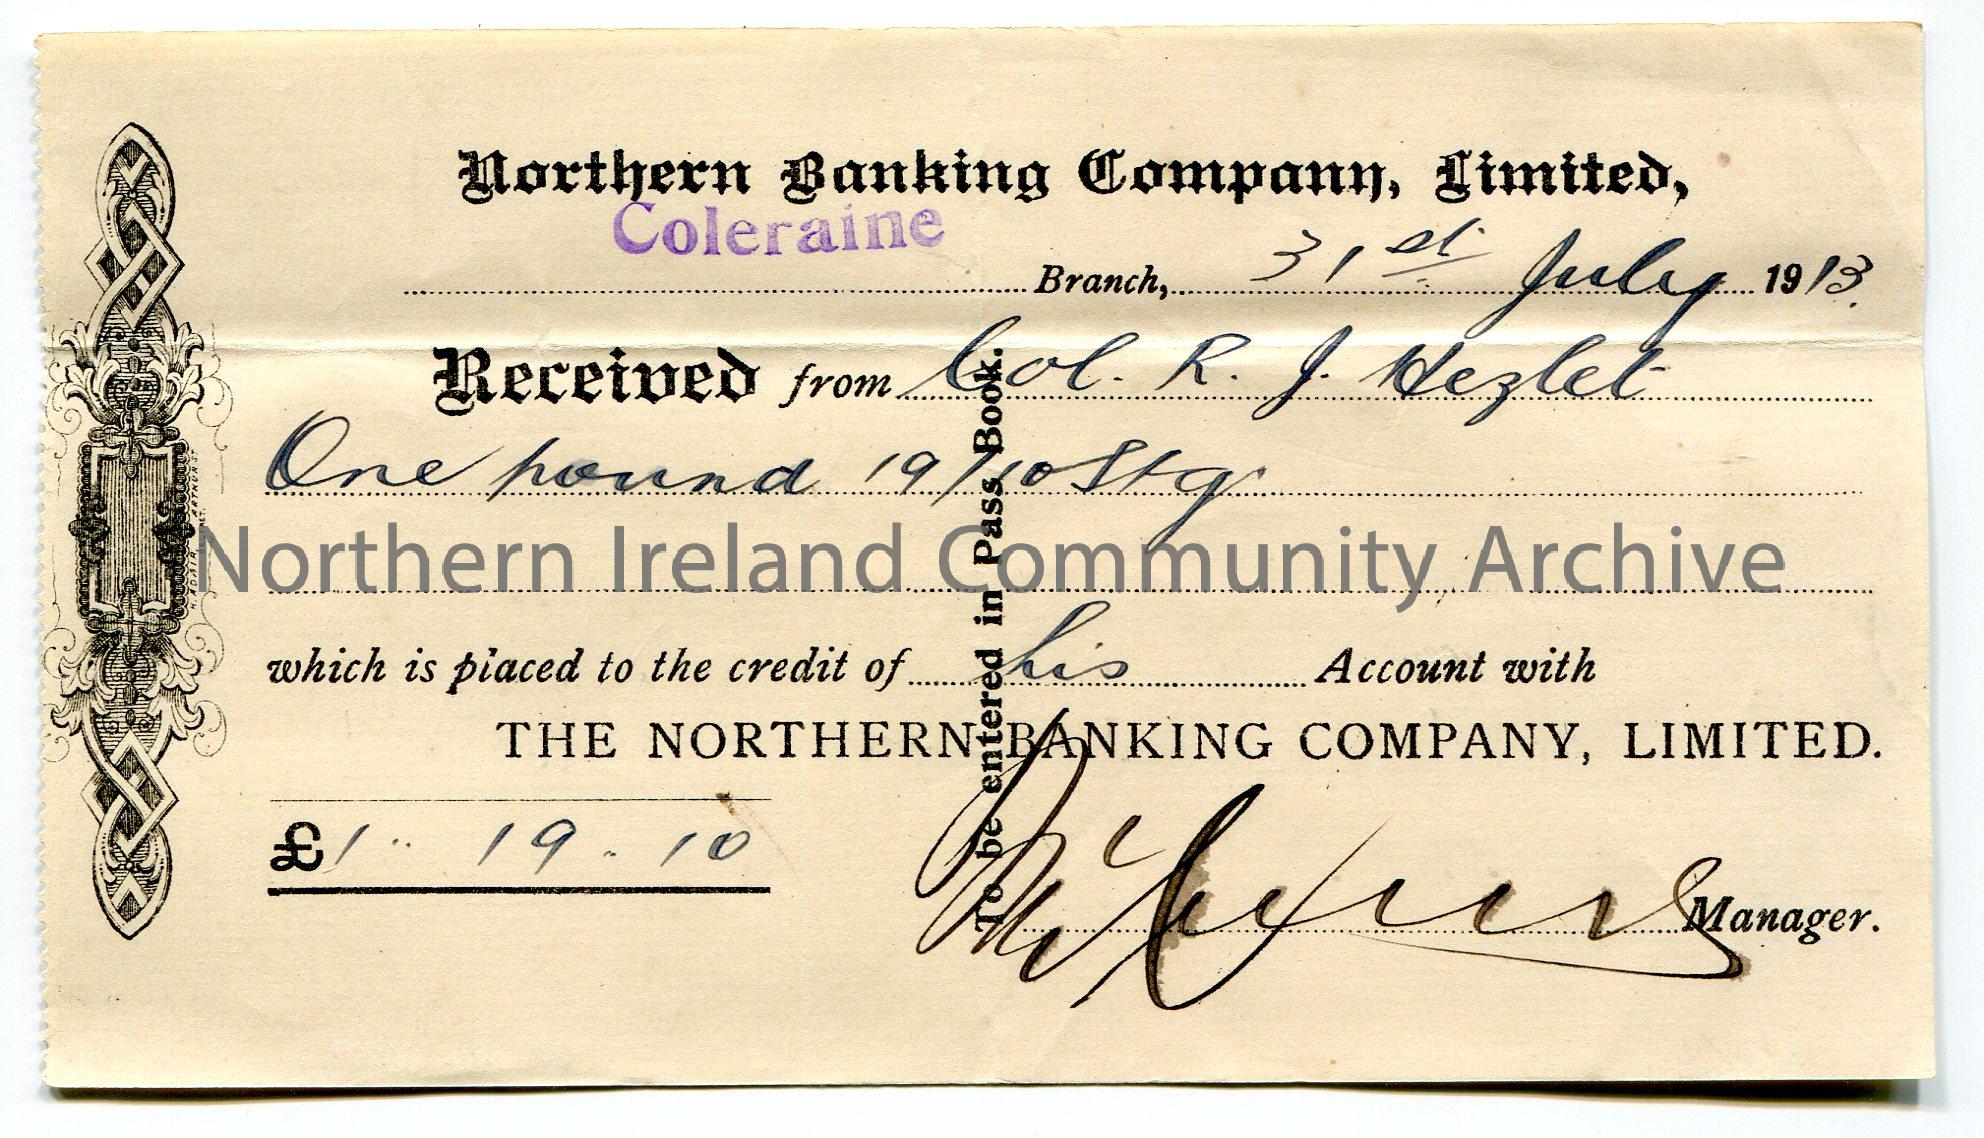 Handwritten receipt from the Northern Banking Company, Limited, Coleraine branch for credit of £1.19.10 into the bank account of Col. R. J. Hezle…